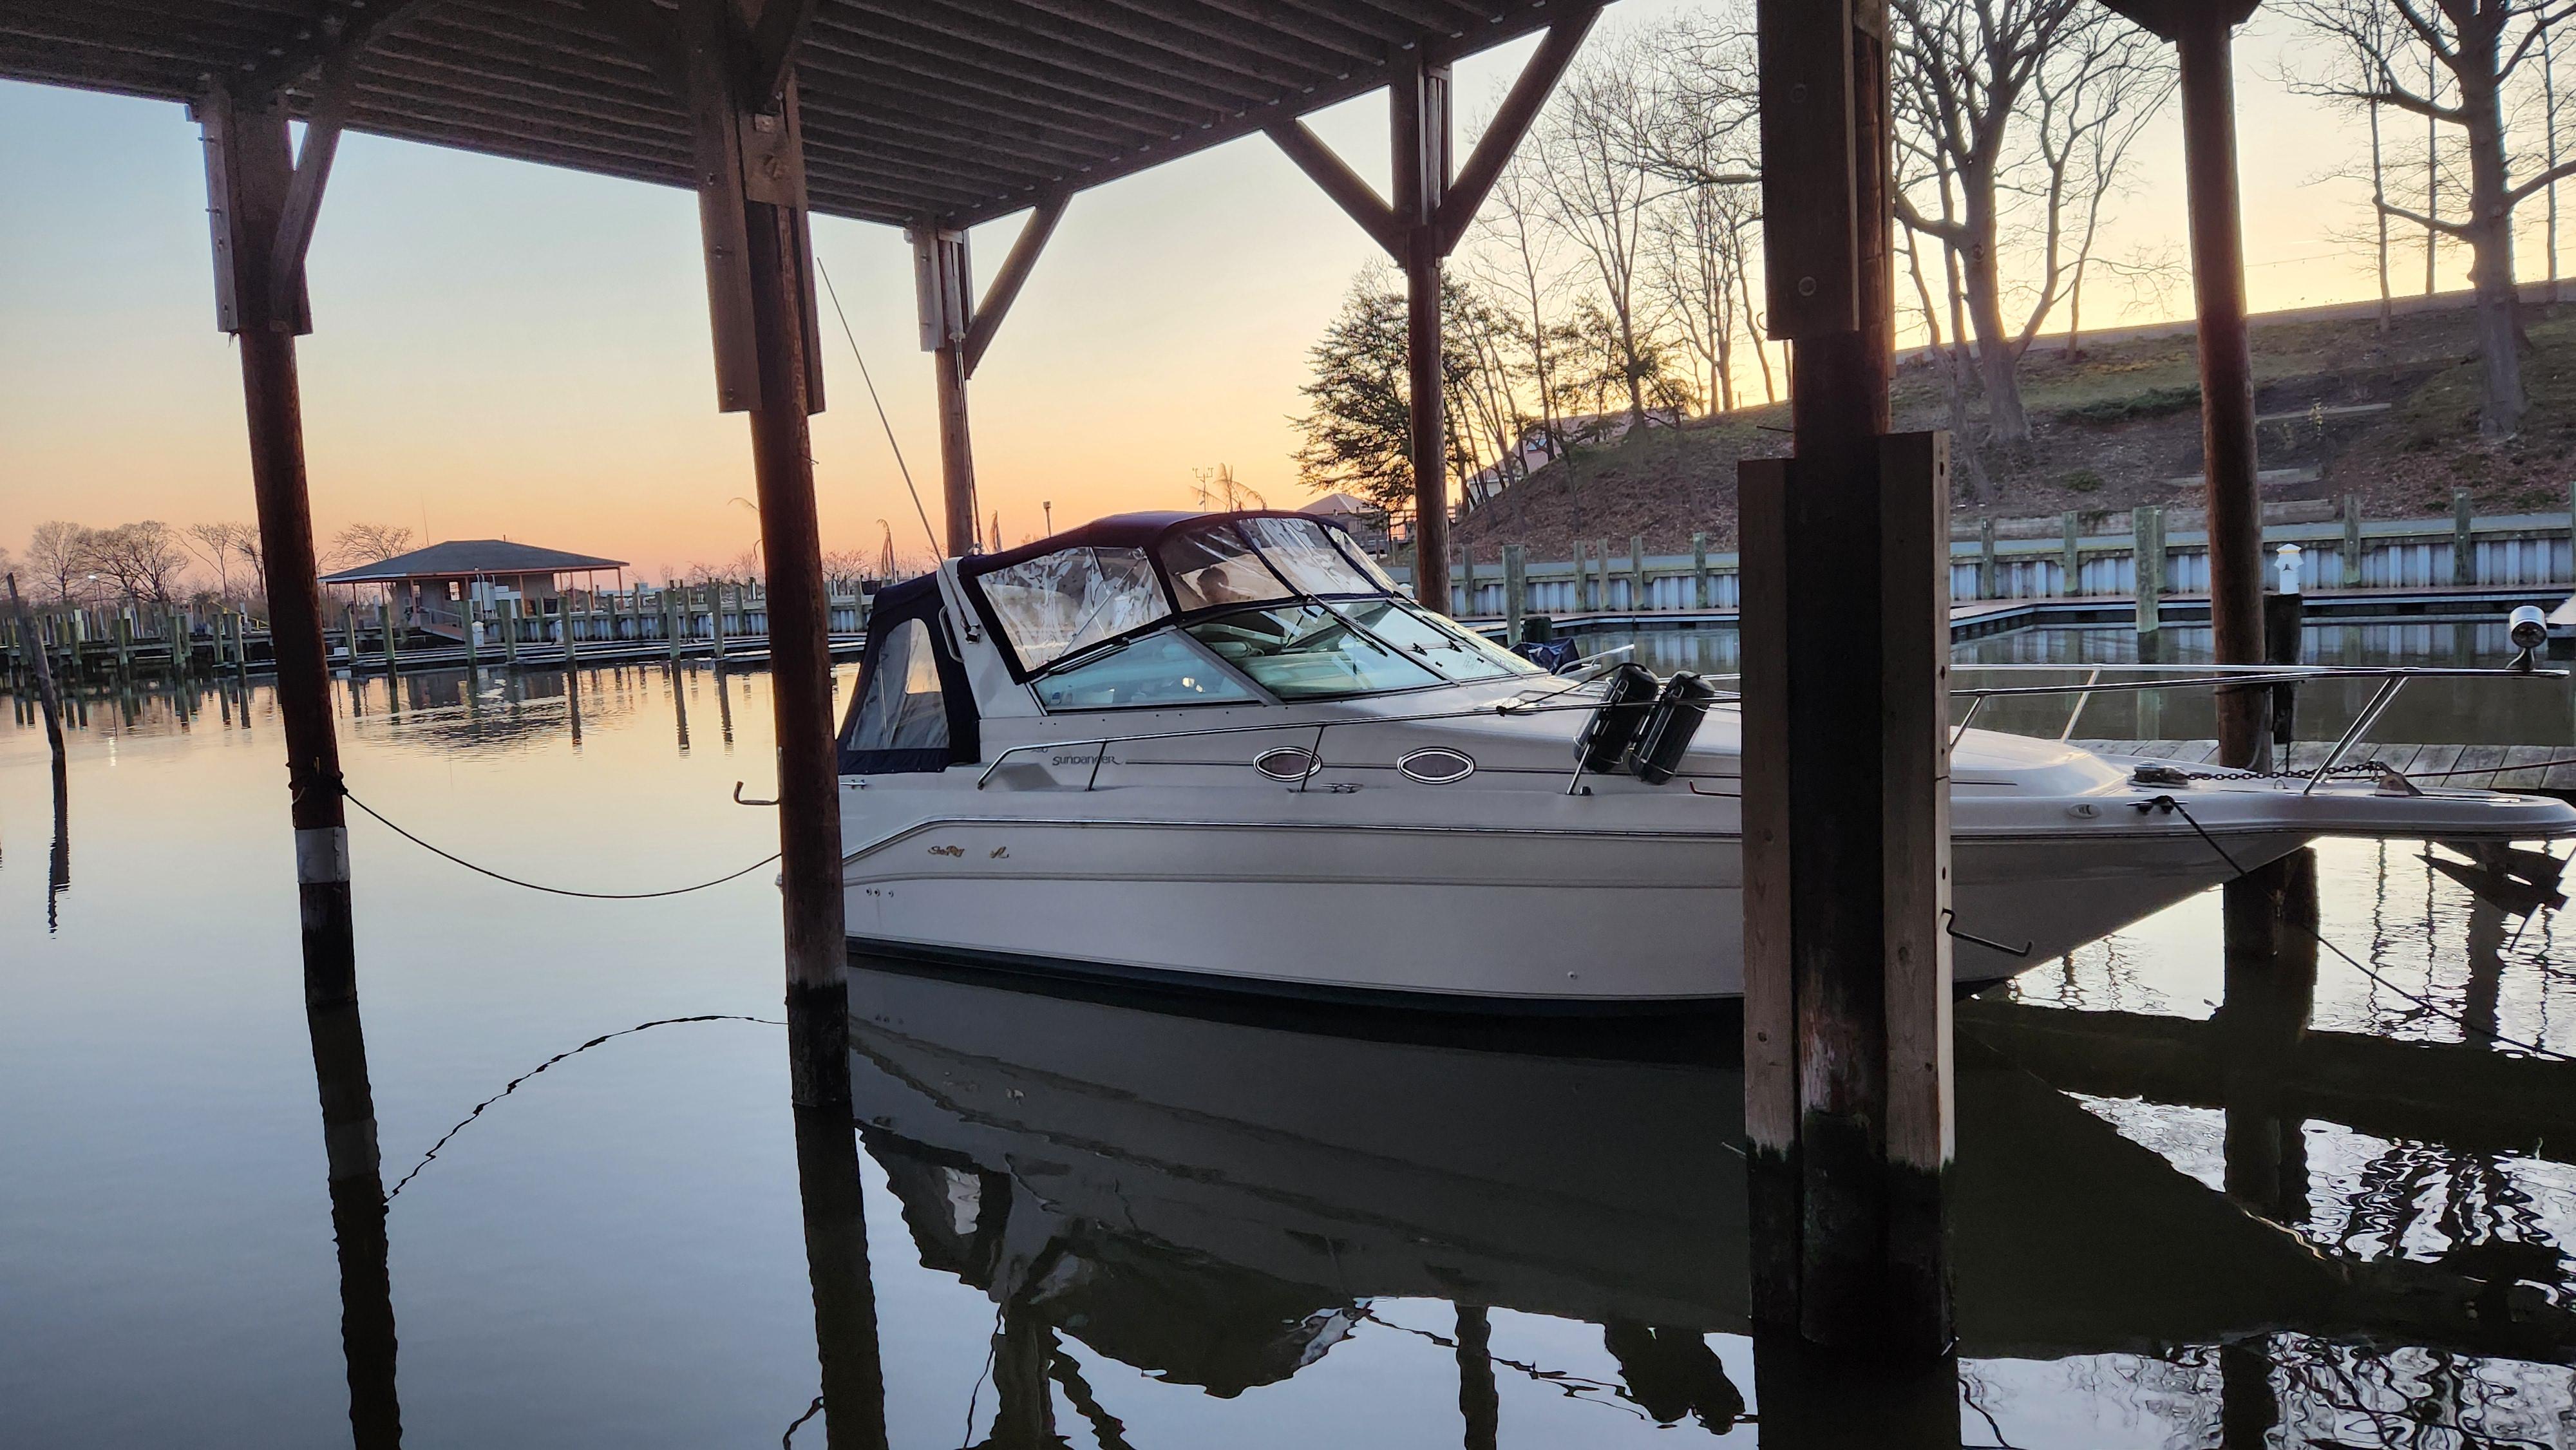 Boats for sale in Chestertown - Boat Trader